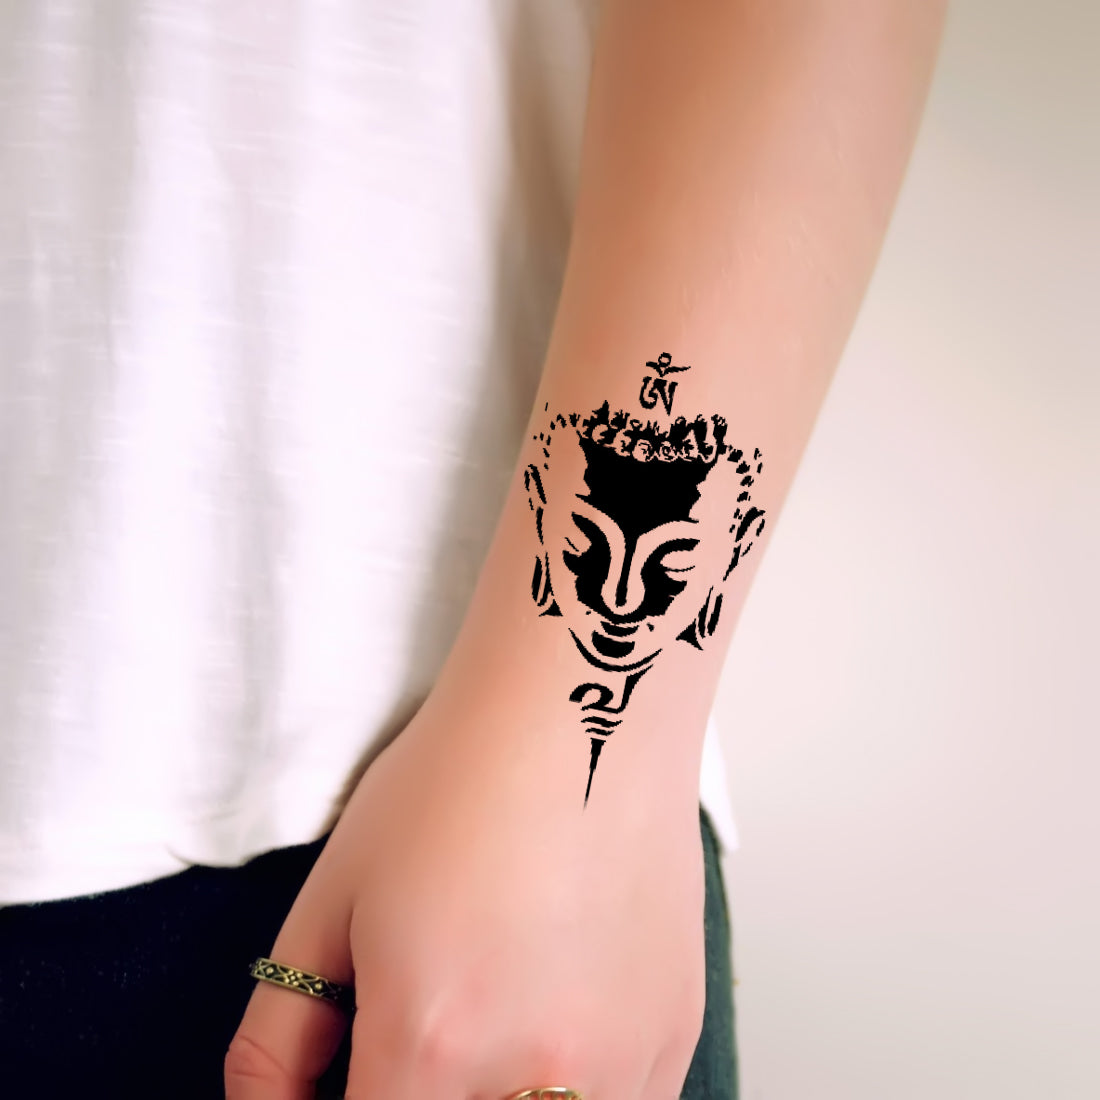 Aliens Tattoo - Buddha Tattoos look beautiful. They have depth, look  aesthetic, and would make anyone look appealing. You could never go wrong  with Buddha Tattoos. . . Check out this amazing